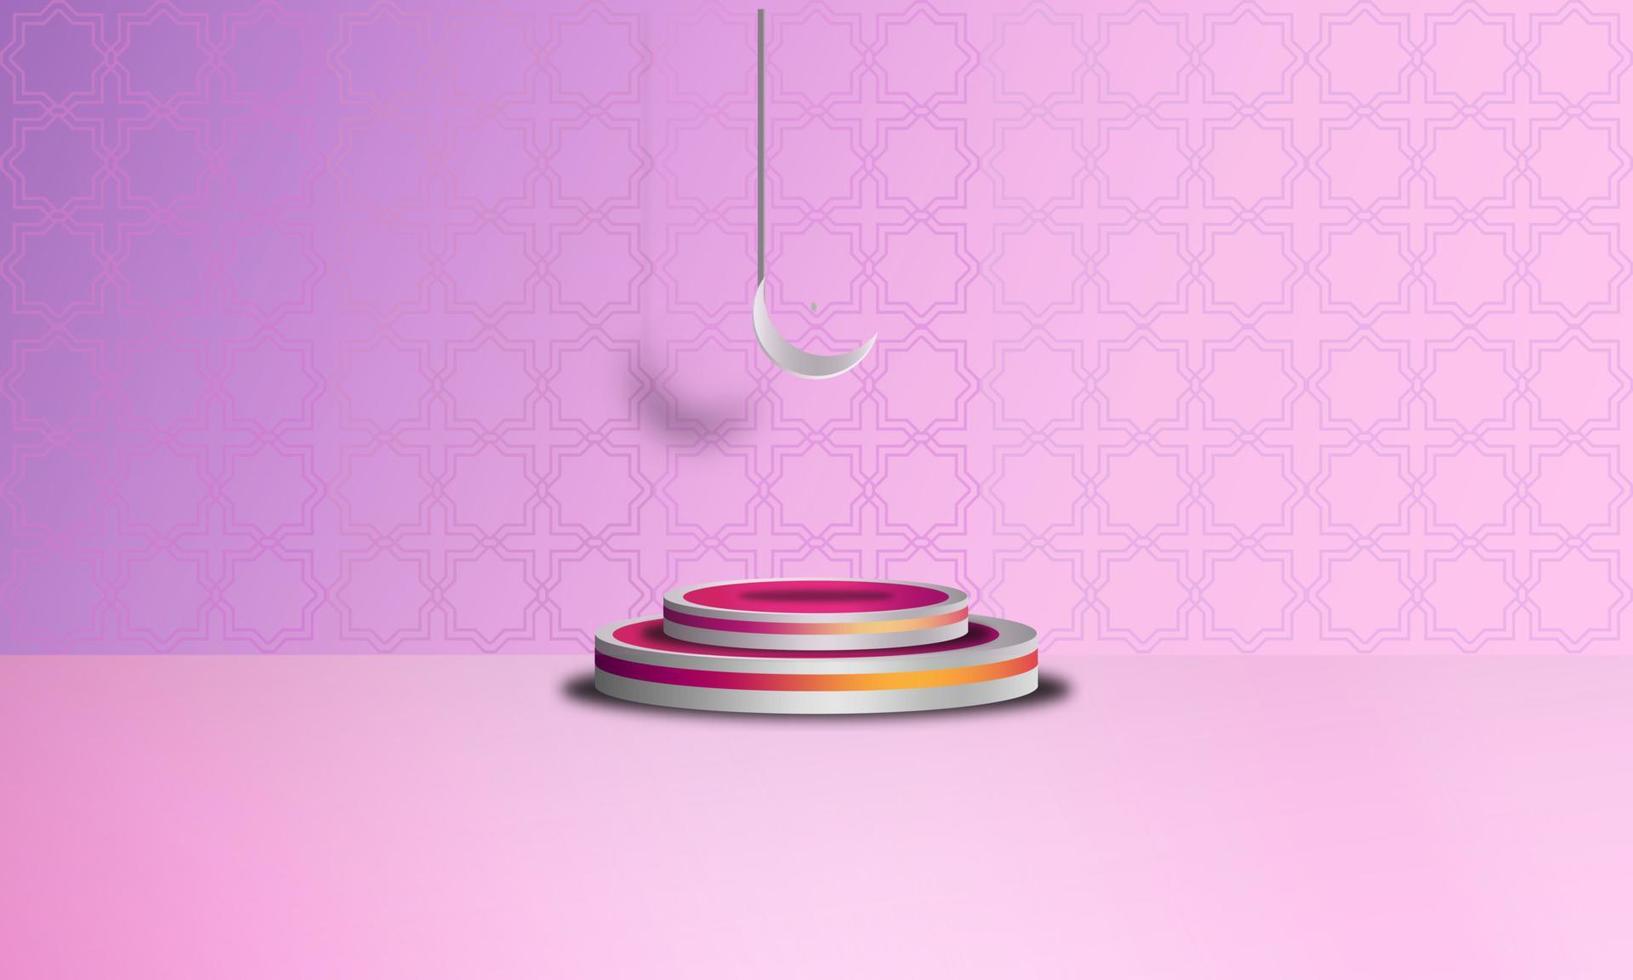 Islamic background 3d pink podium object and 3d Islamic ornament, vector design eps 10